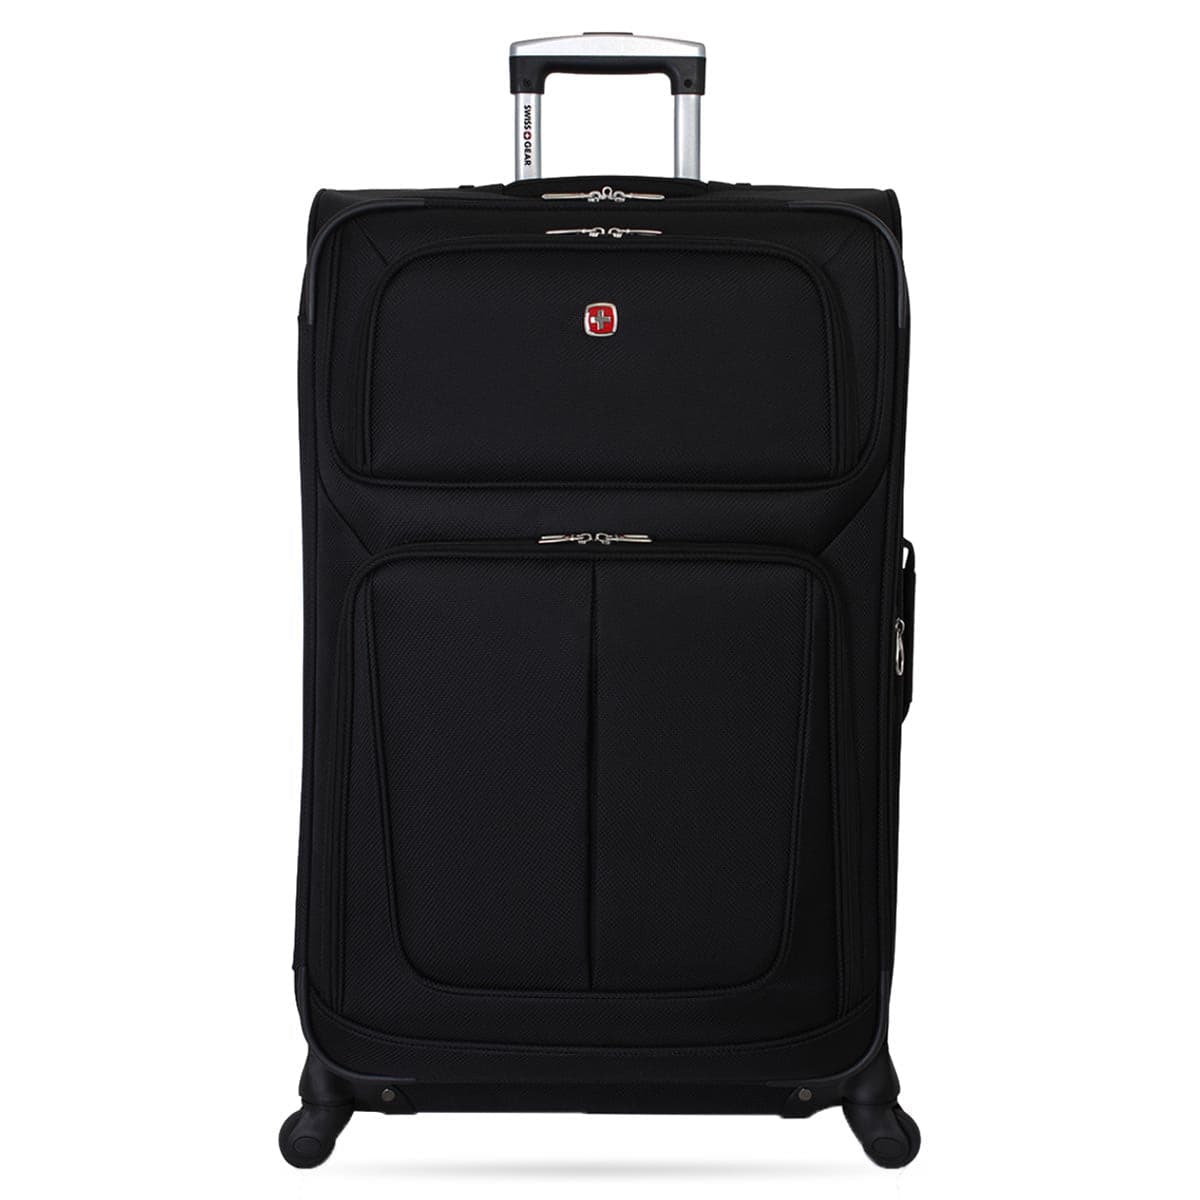 SwissGear 29" Check-In Spinner Luggage